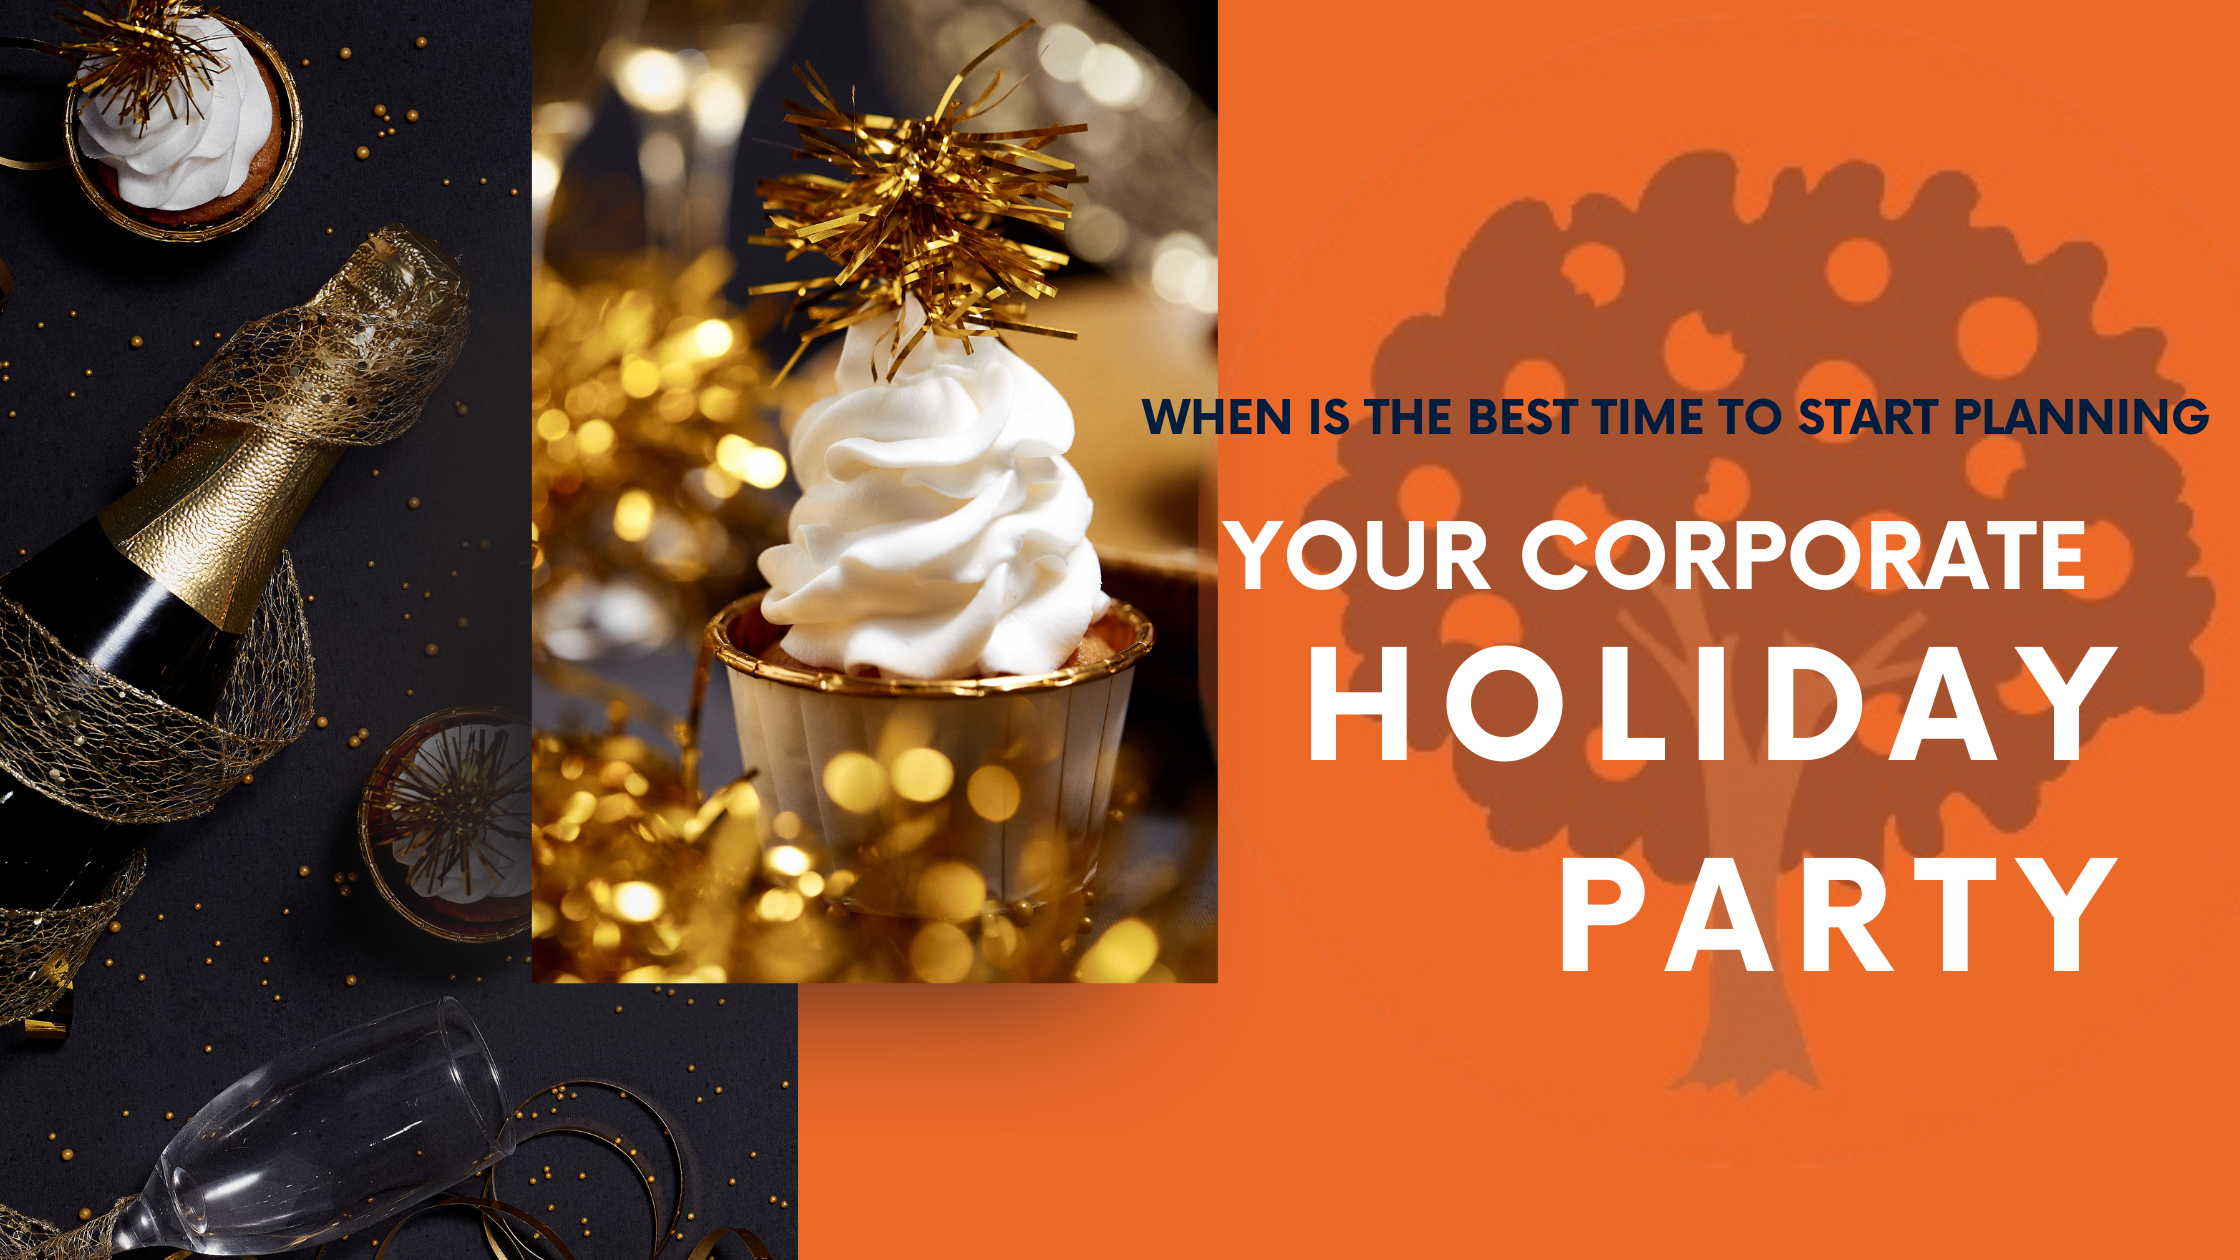 When is the best time to start planning your corporate holiday party